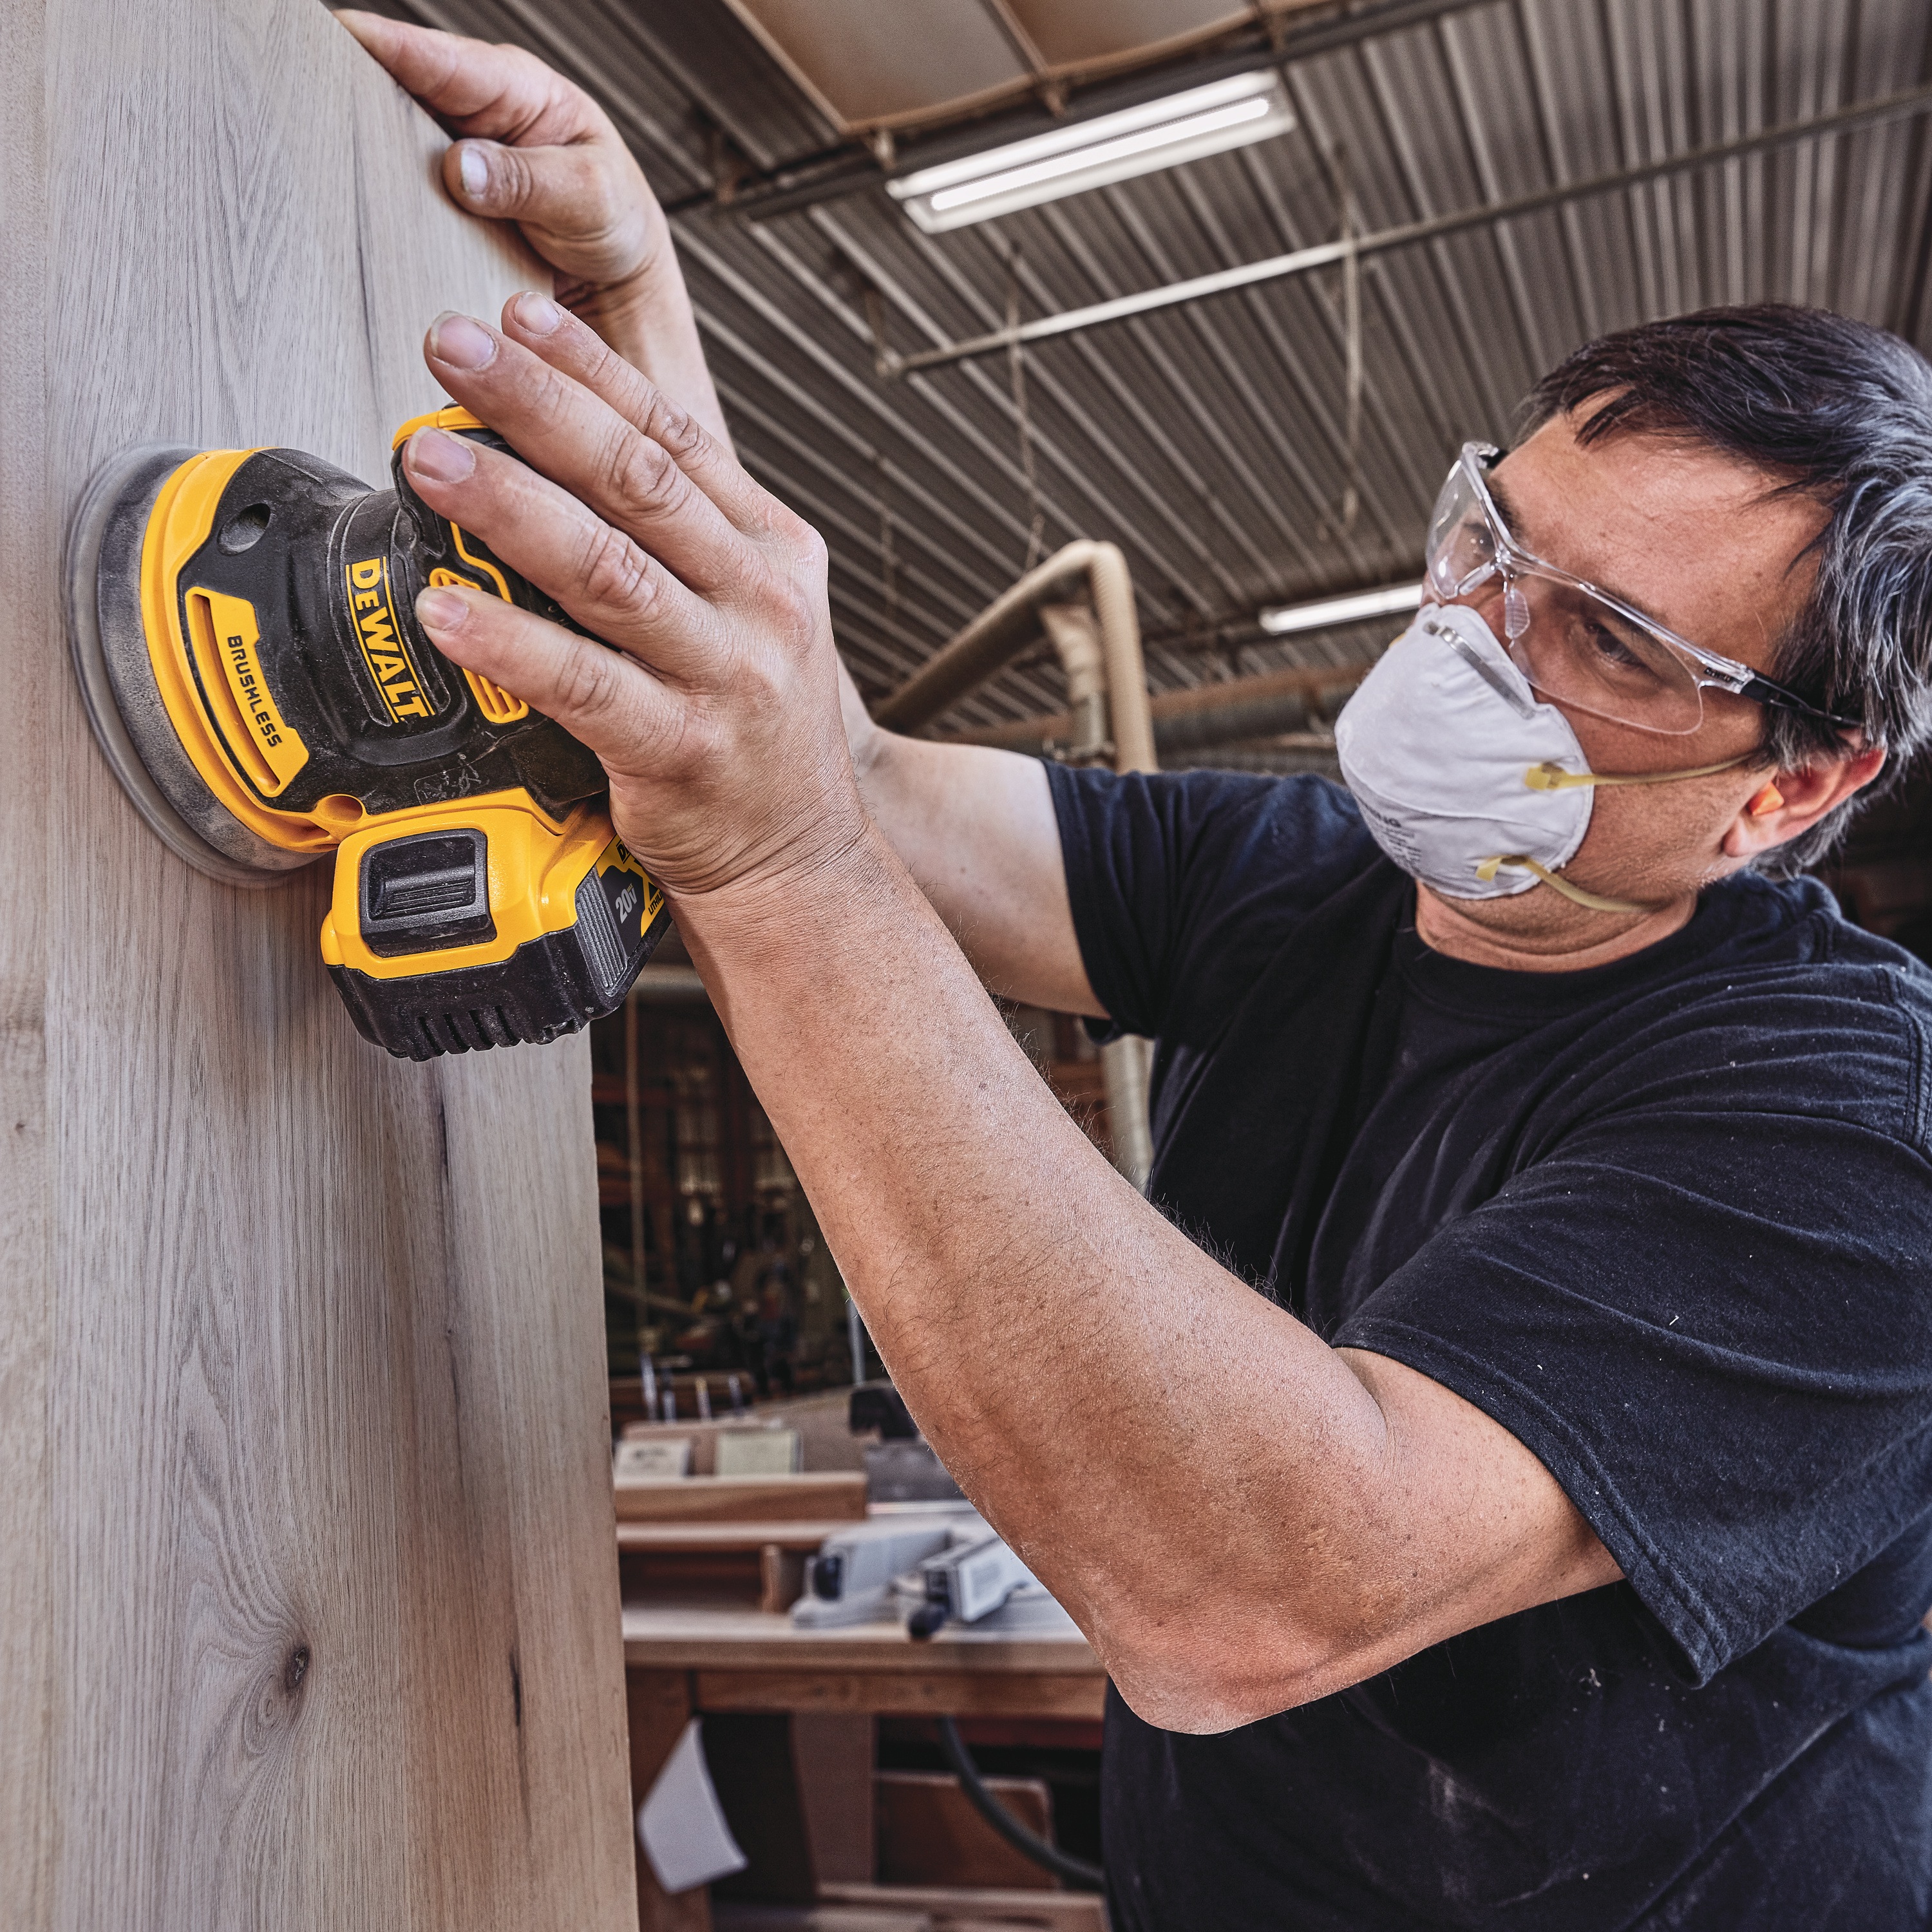 Brushless Cordless Variable Sheet Sander being used by a person.